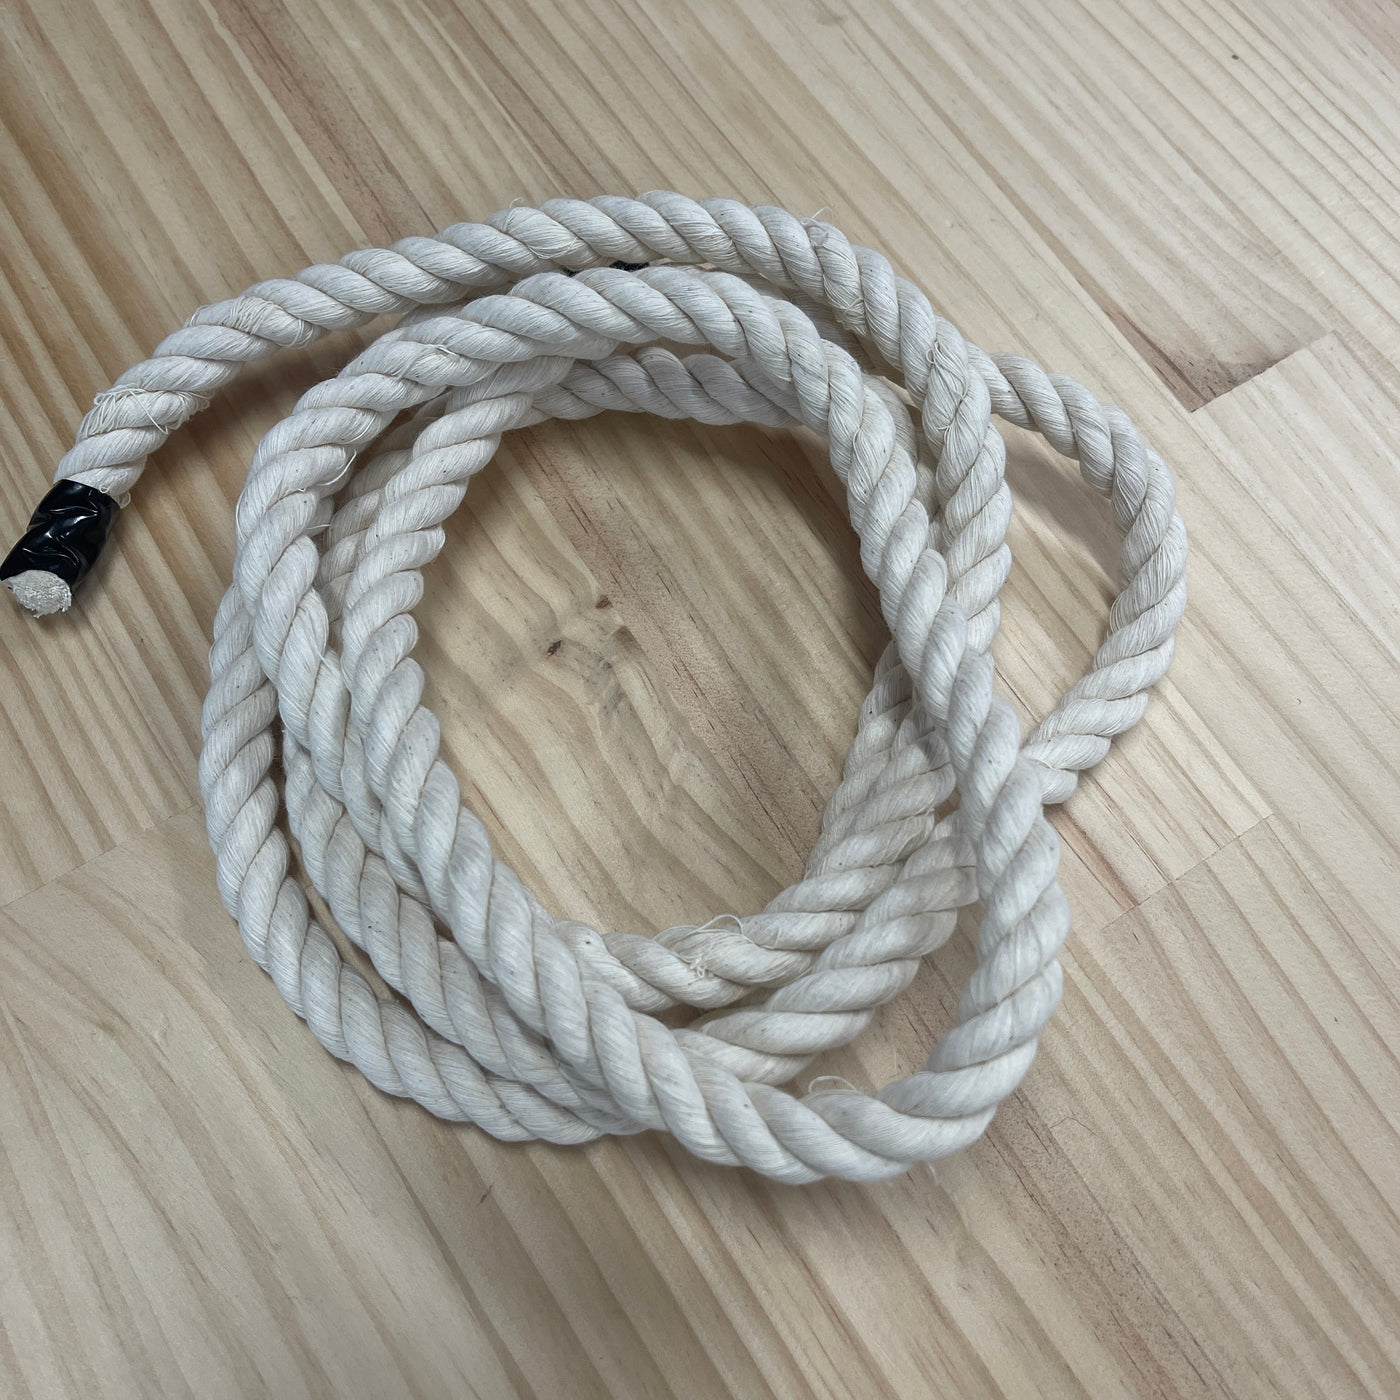 Macrame 3ply Cotton Rope Natural - Seconds 2m length